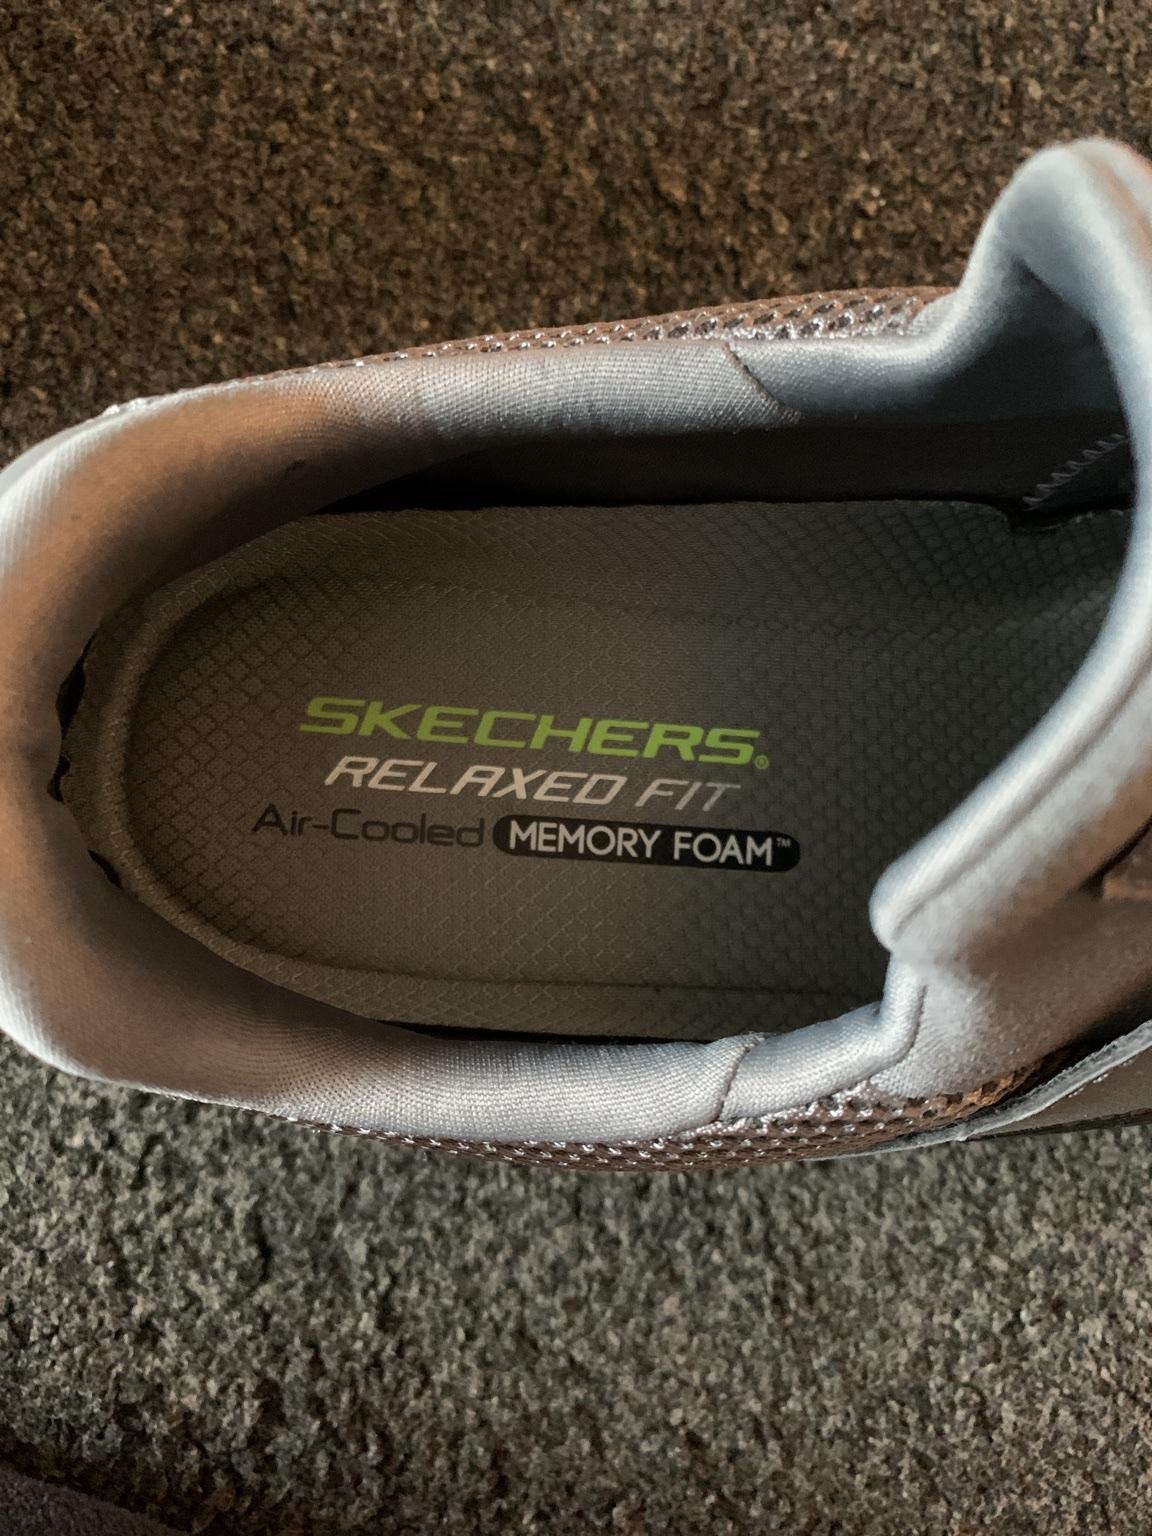 relaxed fit air cooled memory foam skechers